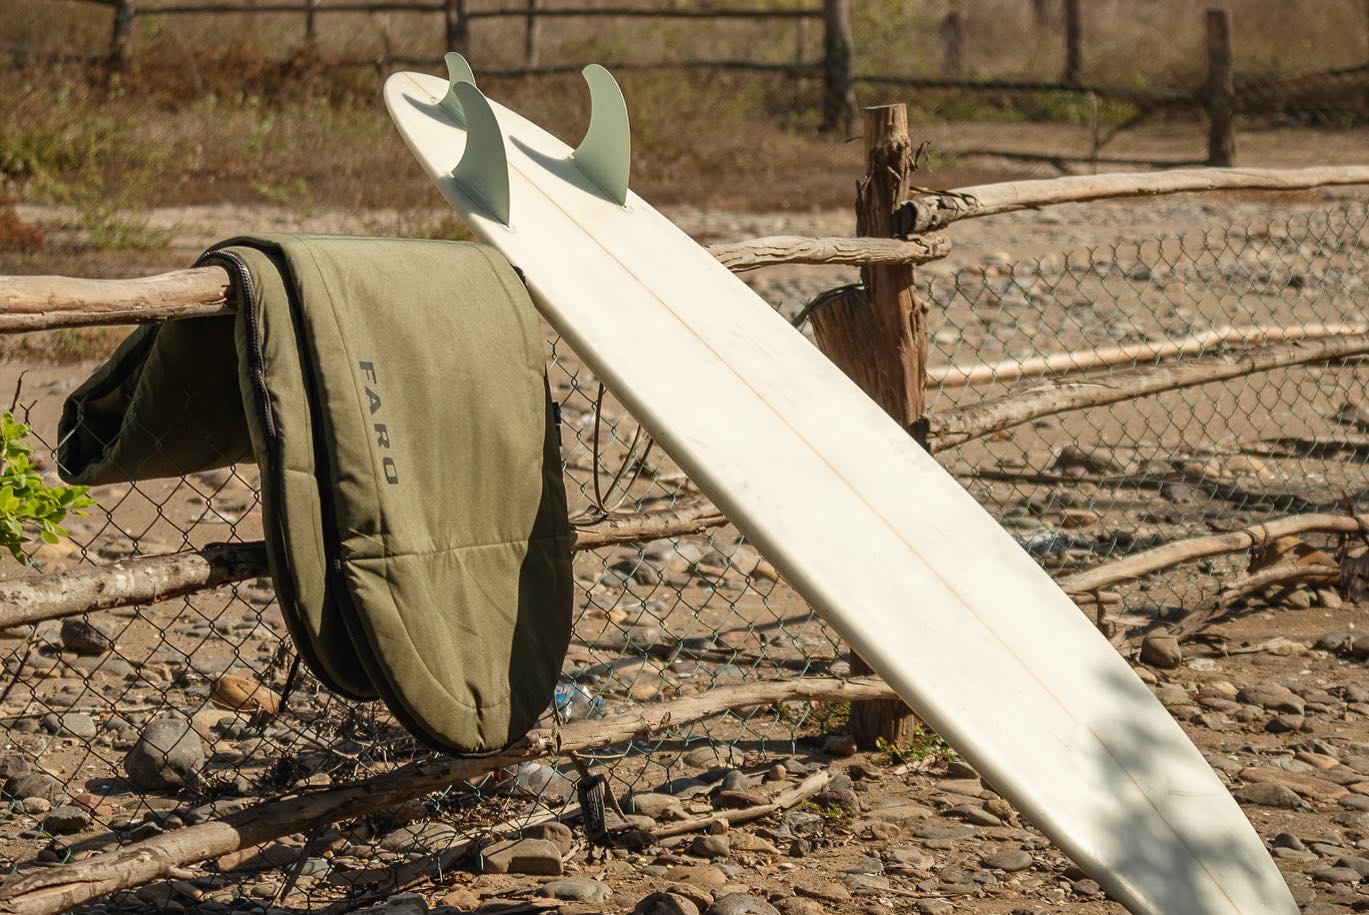 How Much Does a Surfboard Bag Cost?